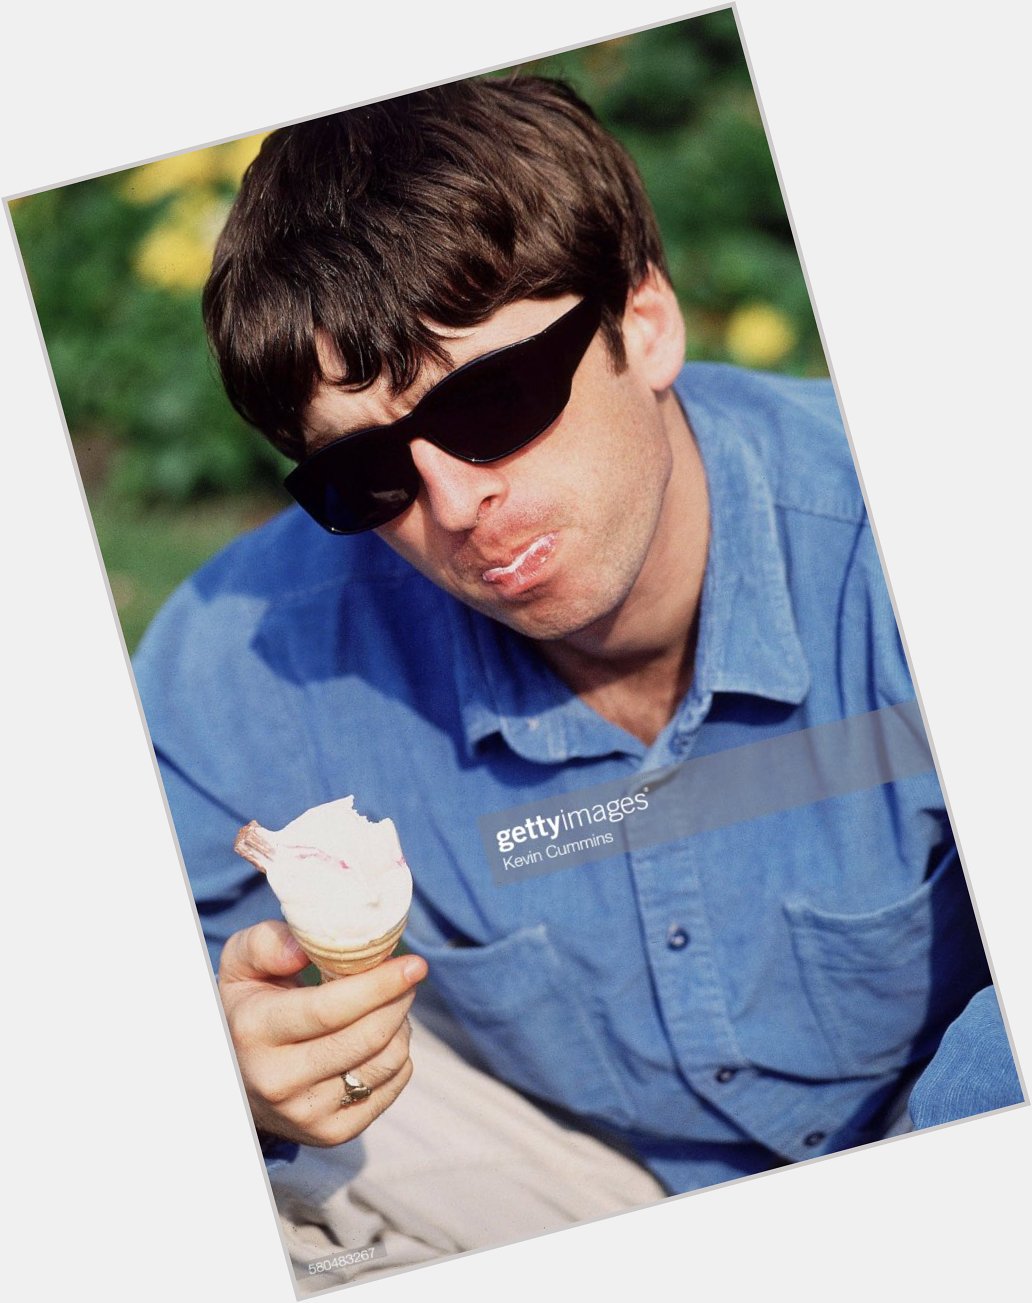 Happy birthday to Mr Noel Gallagher who turns 52 today!  What a musical genius this man is. 